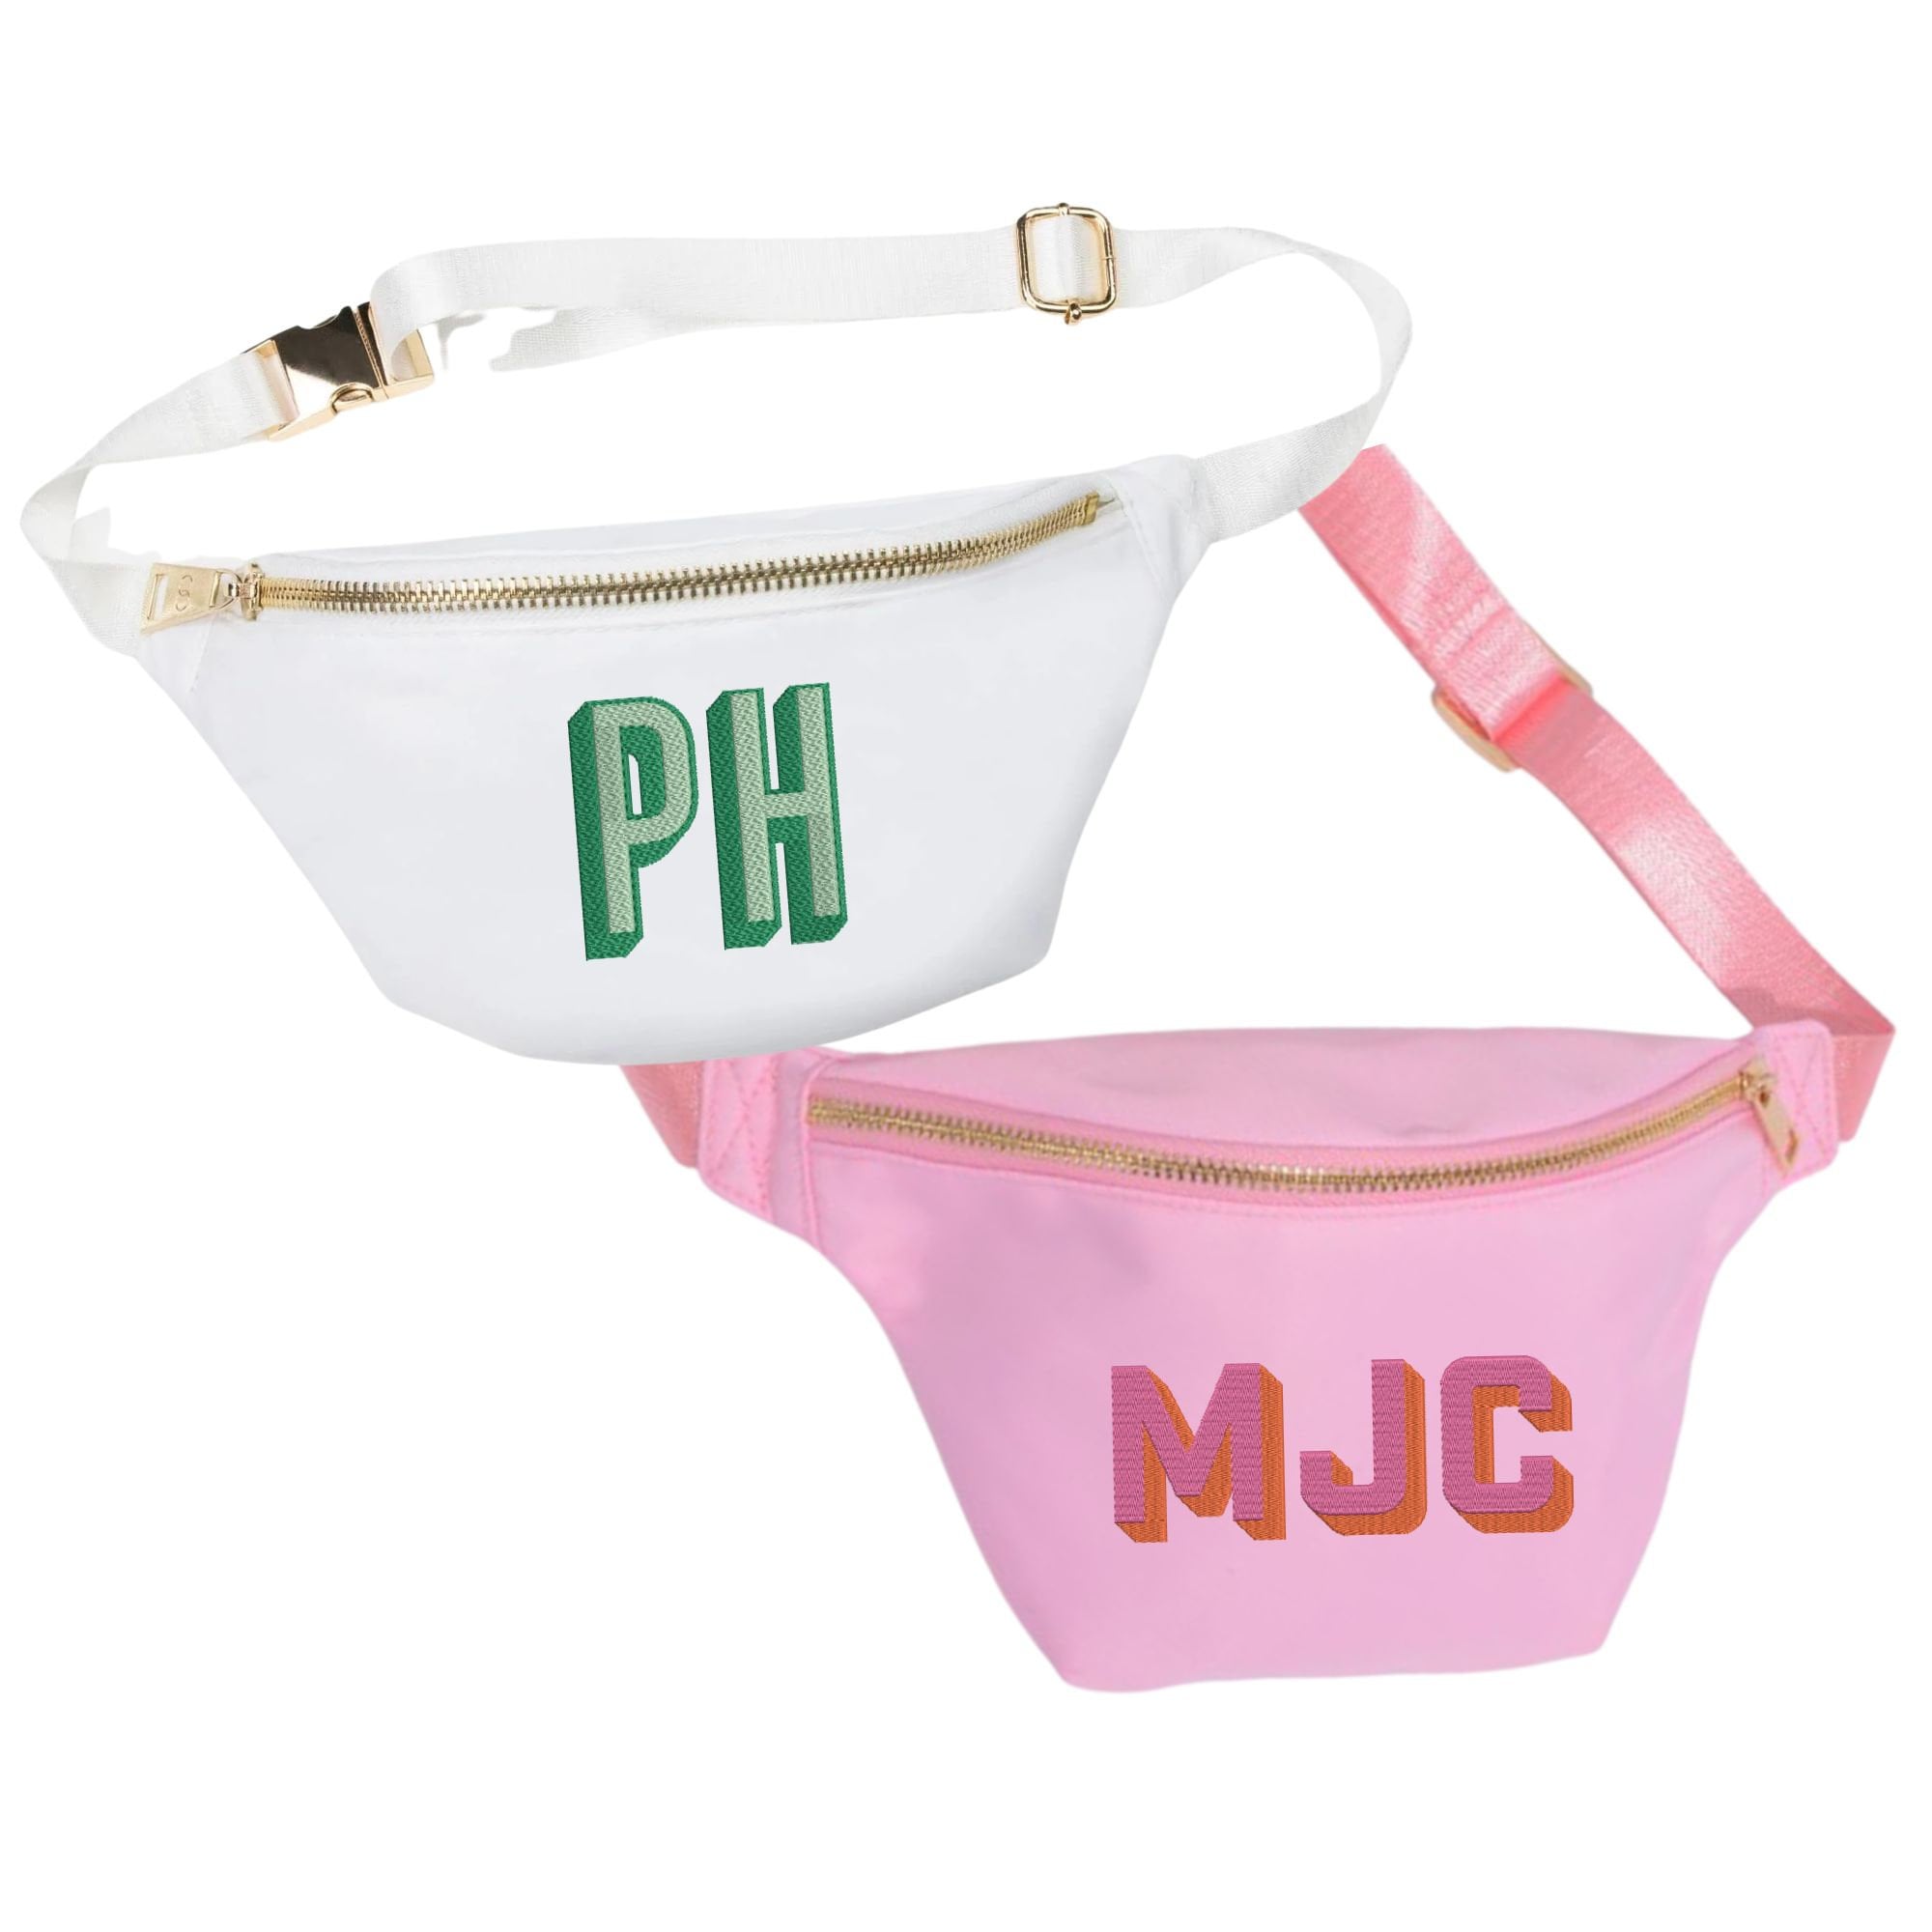 Aesthetic Preppy Pink Patched Fanny Pack!